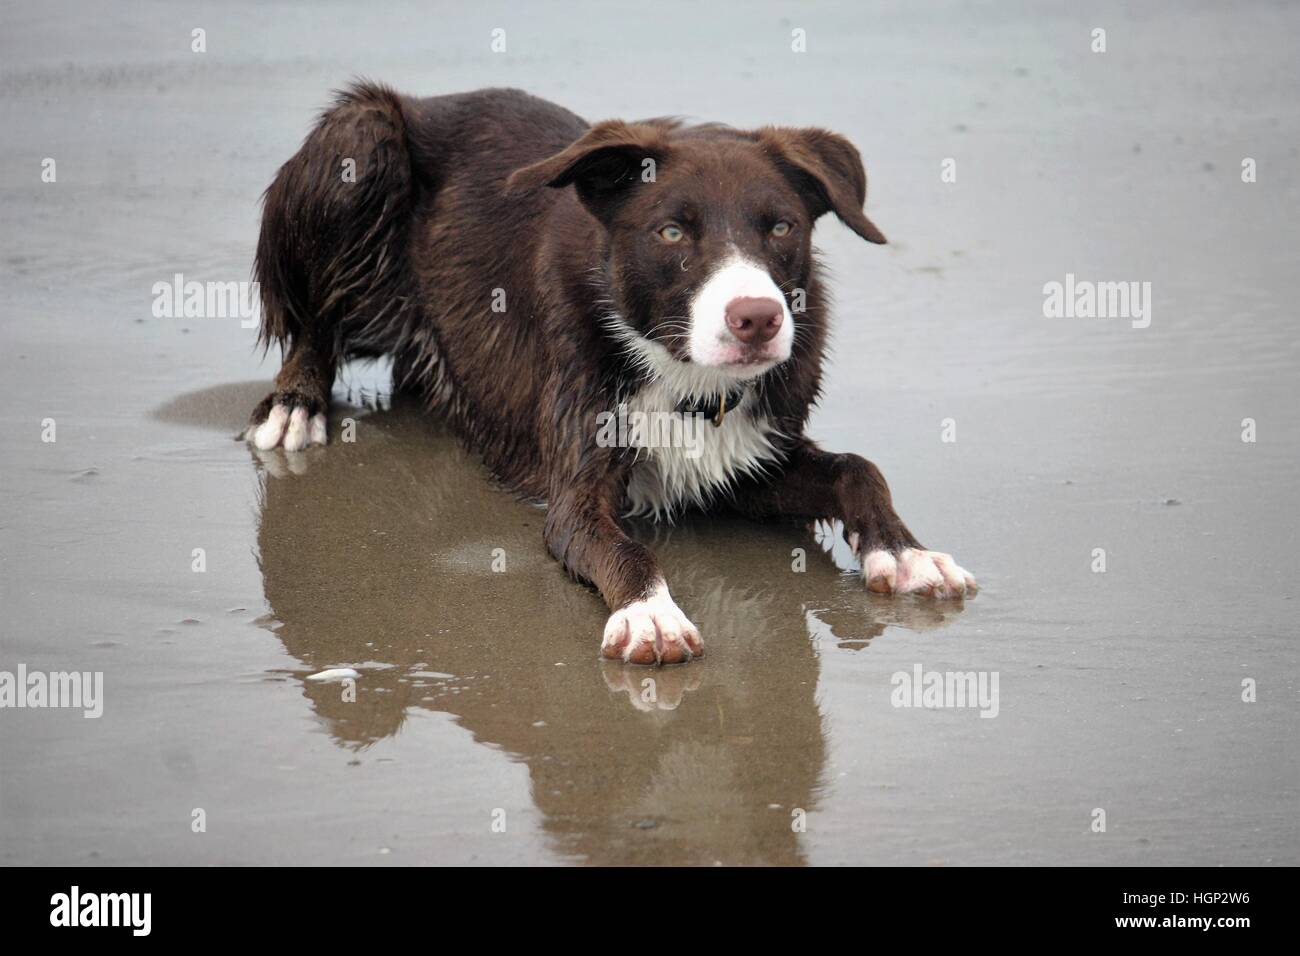 Cute smooth coated red and white border collie puppy dog pet Stock Photo